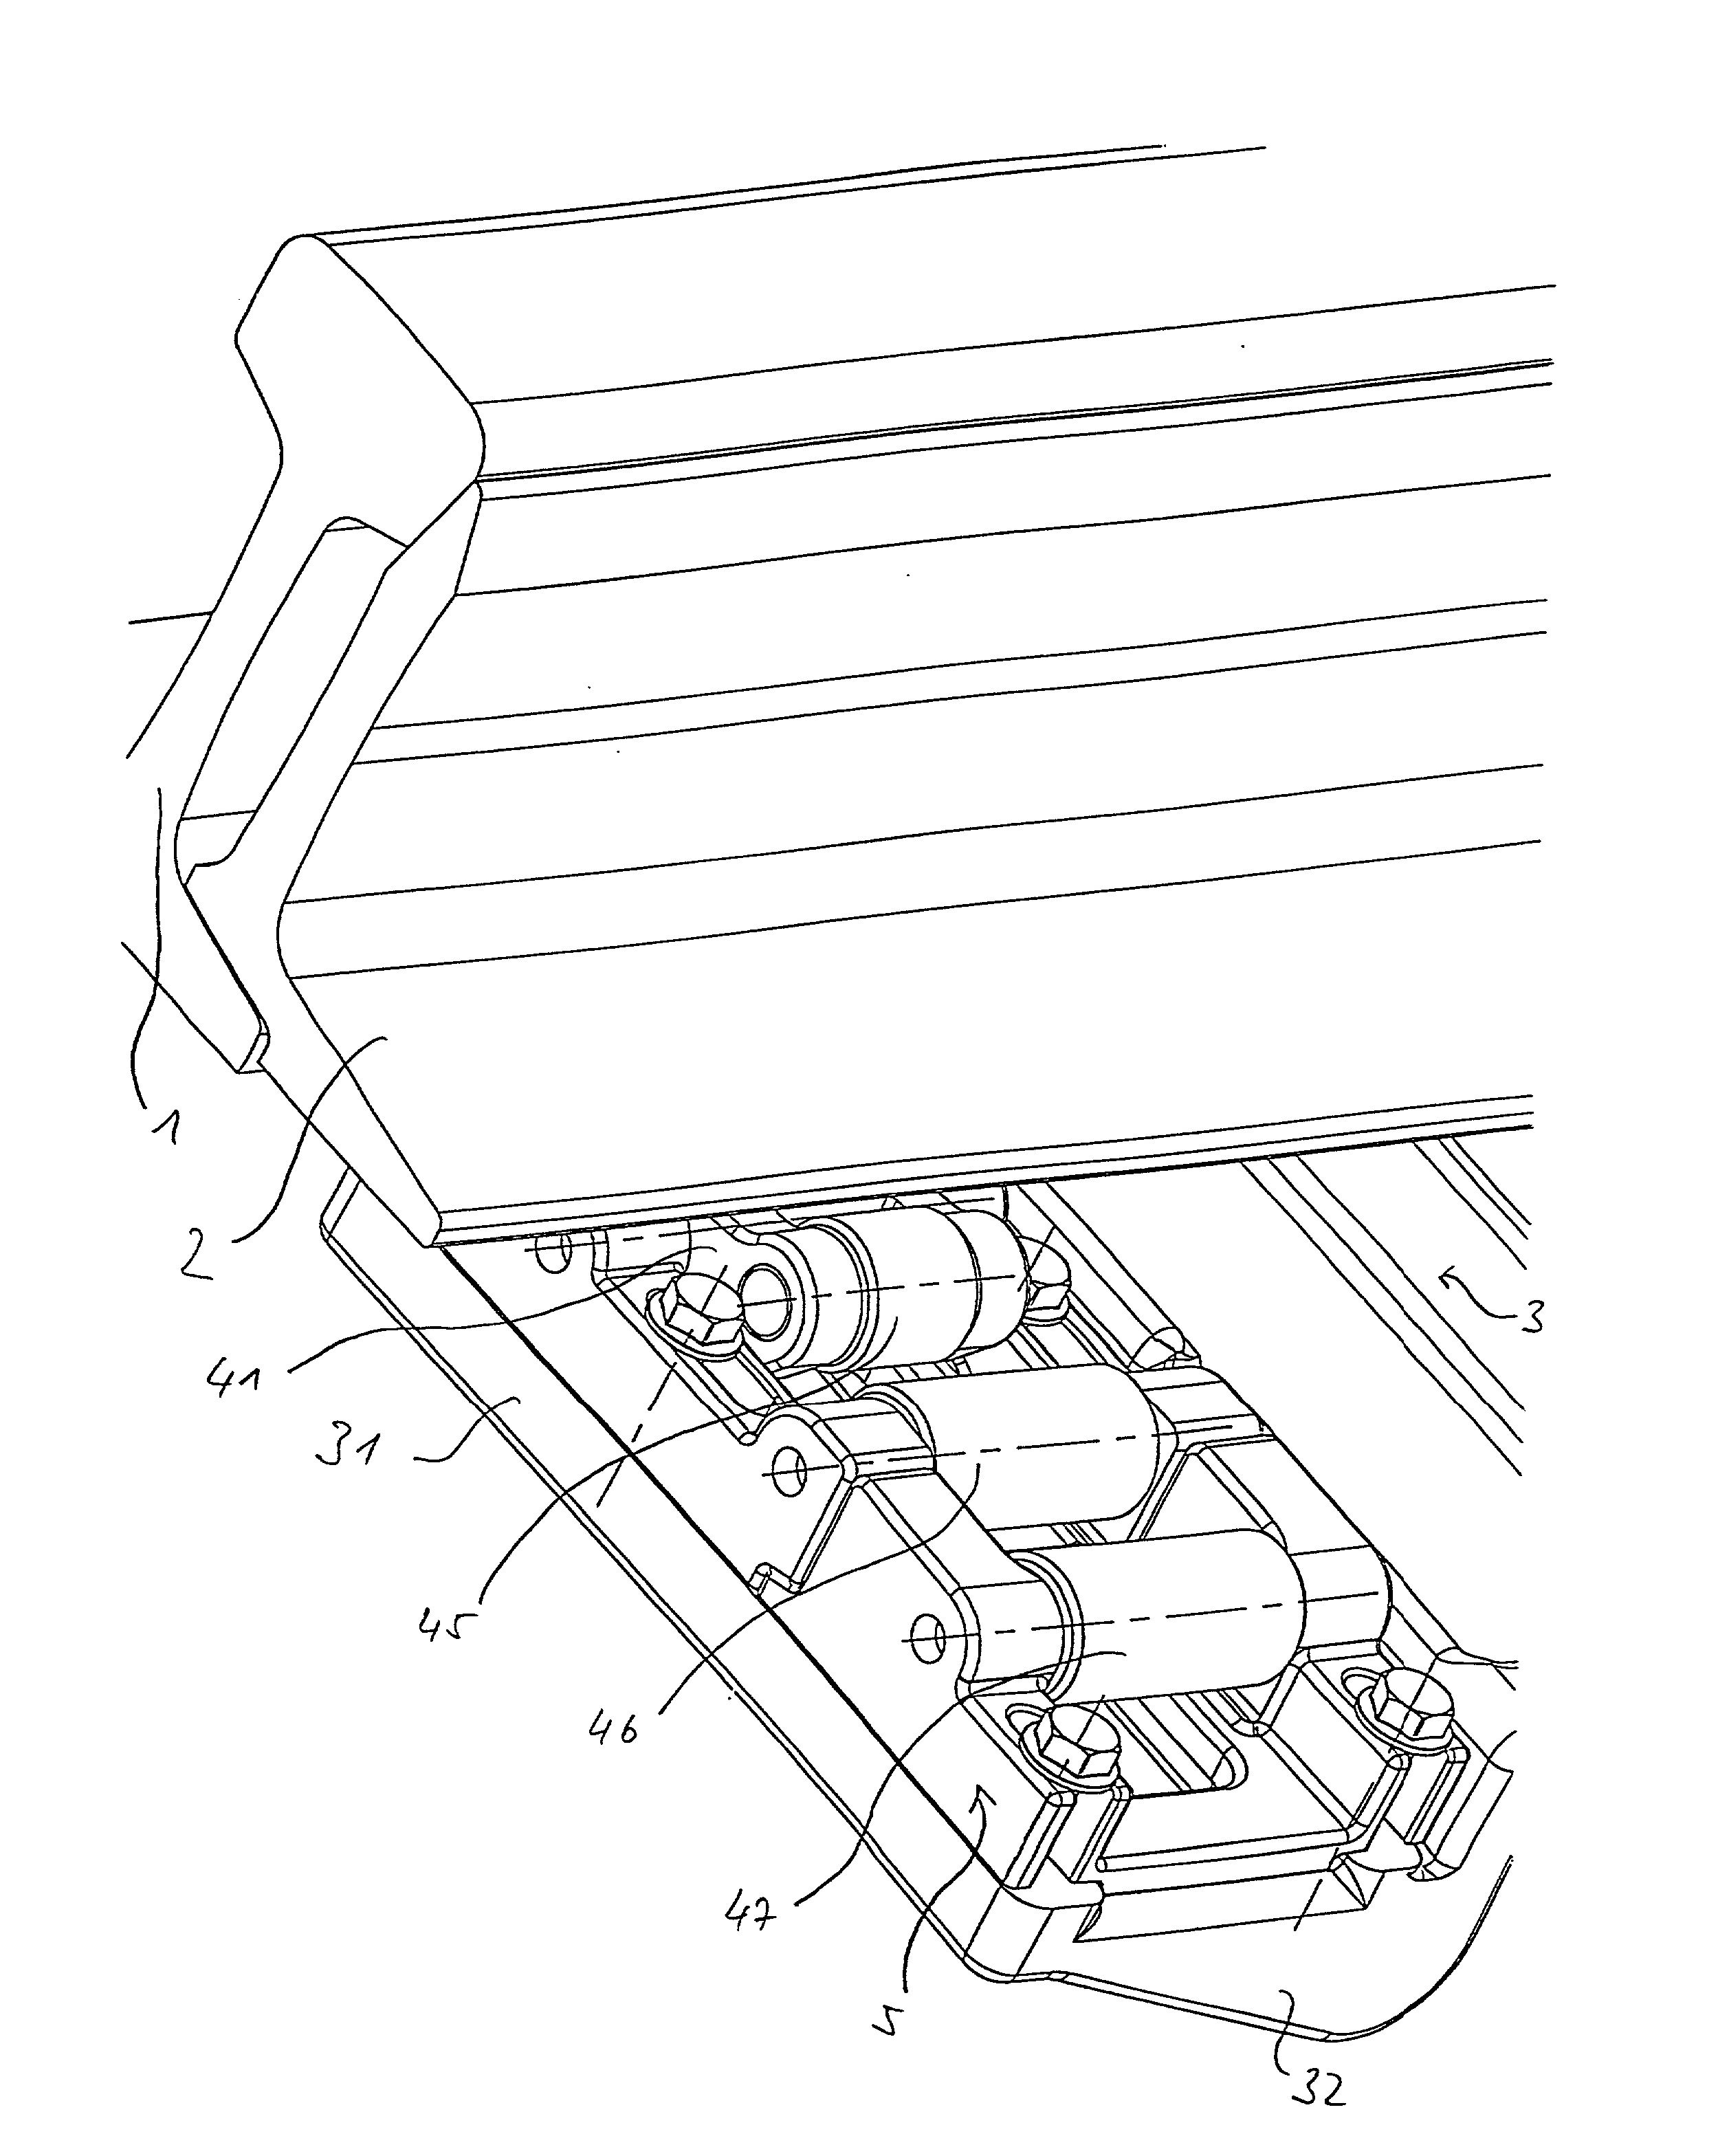 Tongue lifting device for tongue blades made of stock rail profiles